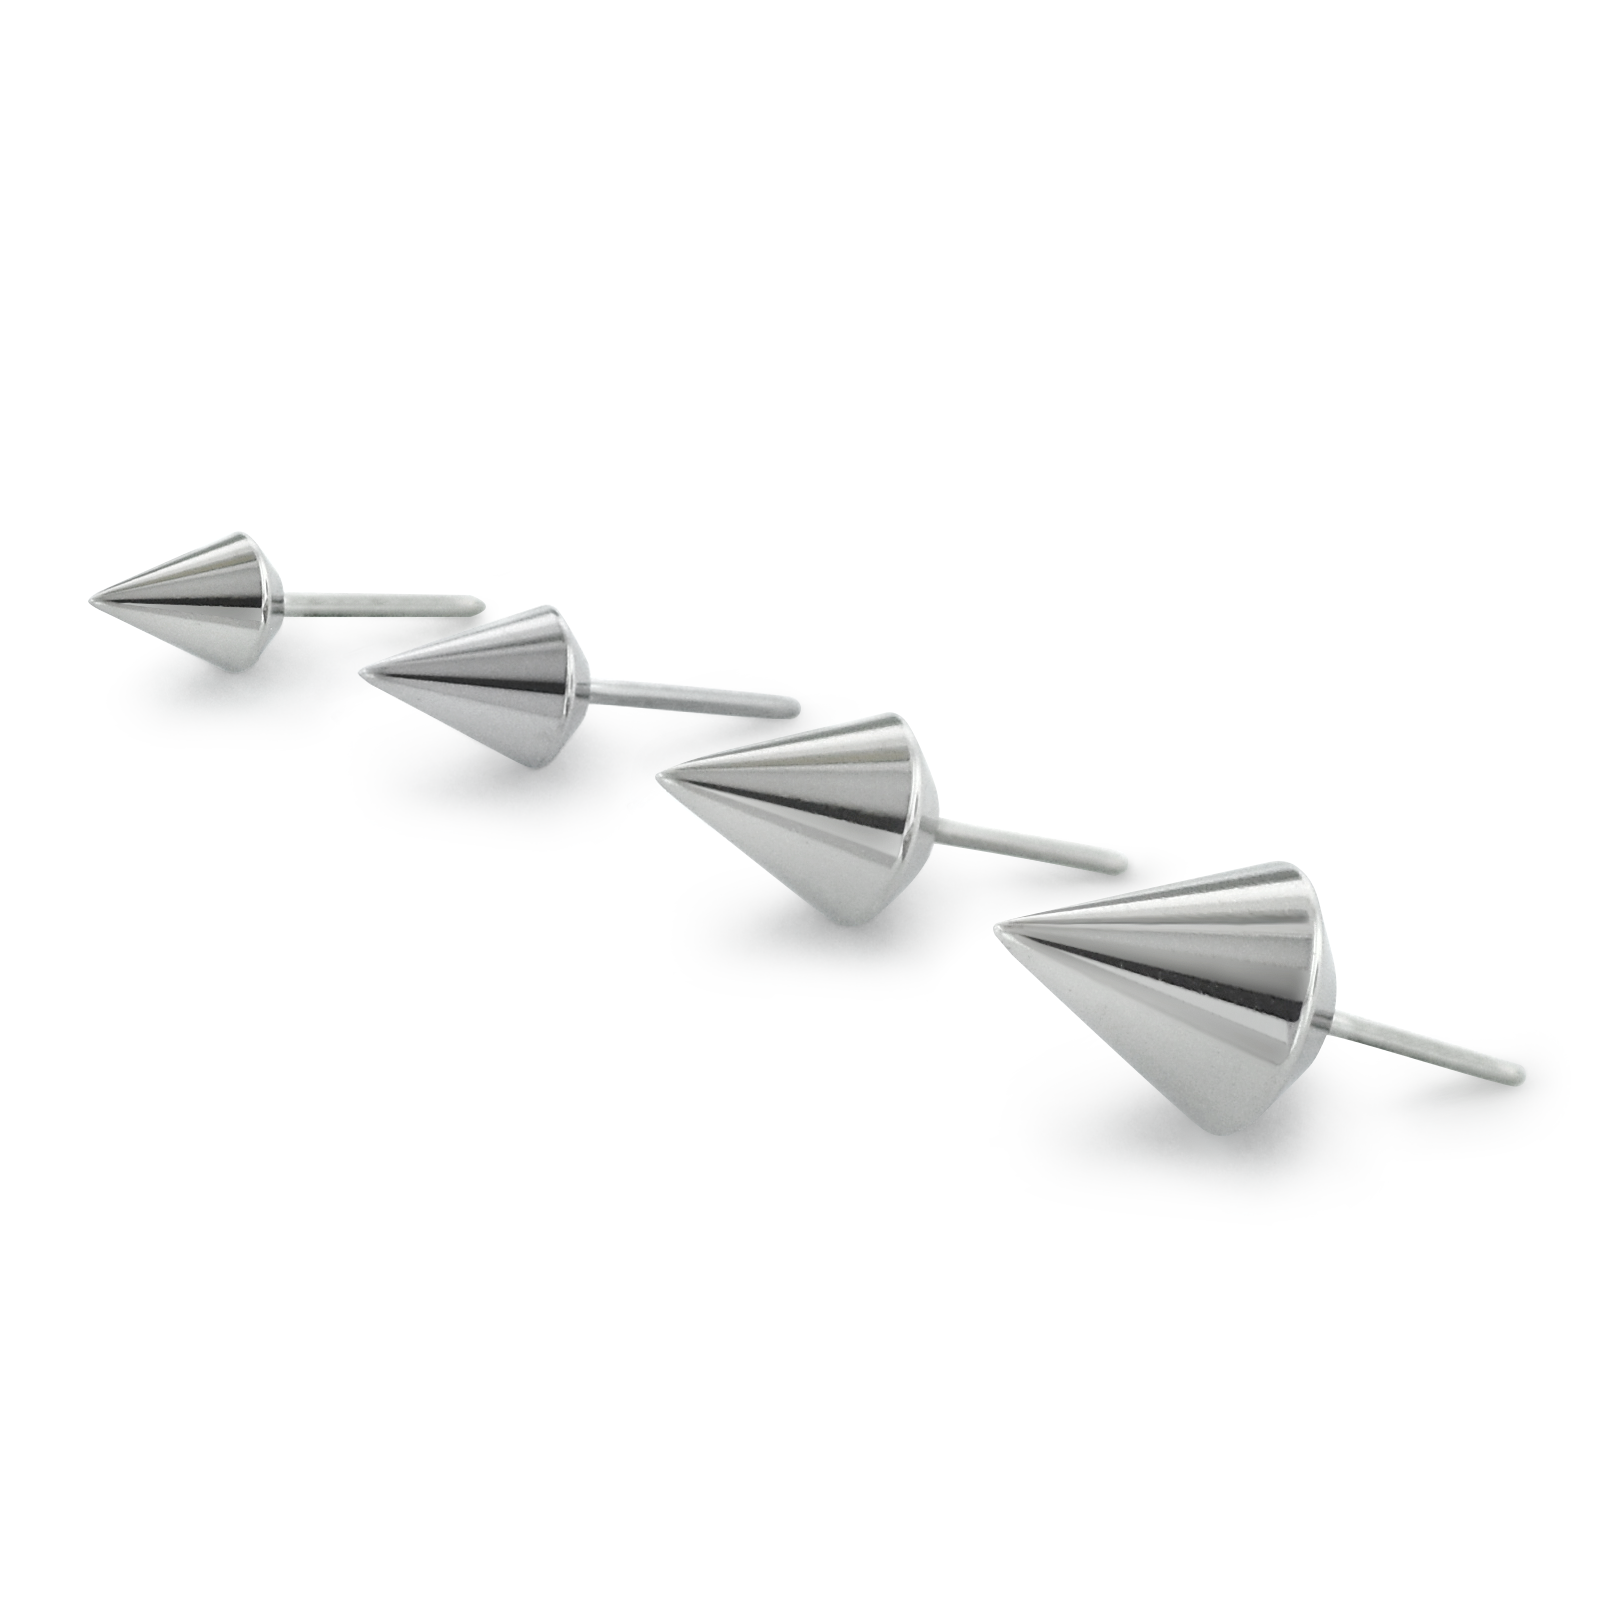 Four sizes of threadless titanium ends in the shape of spears.